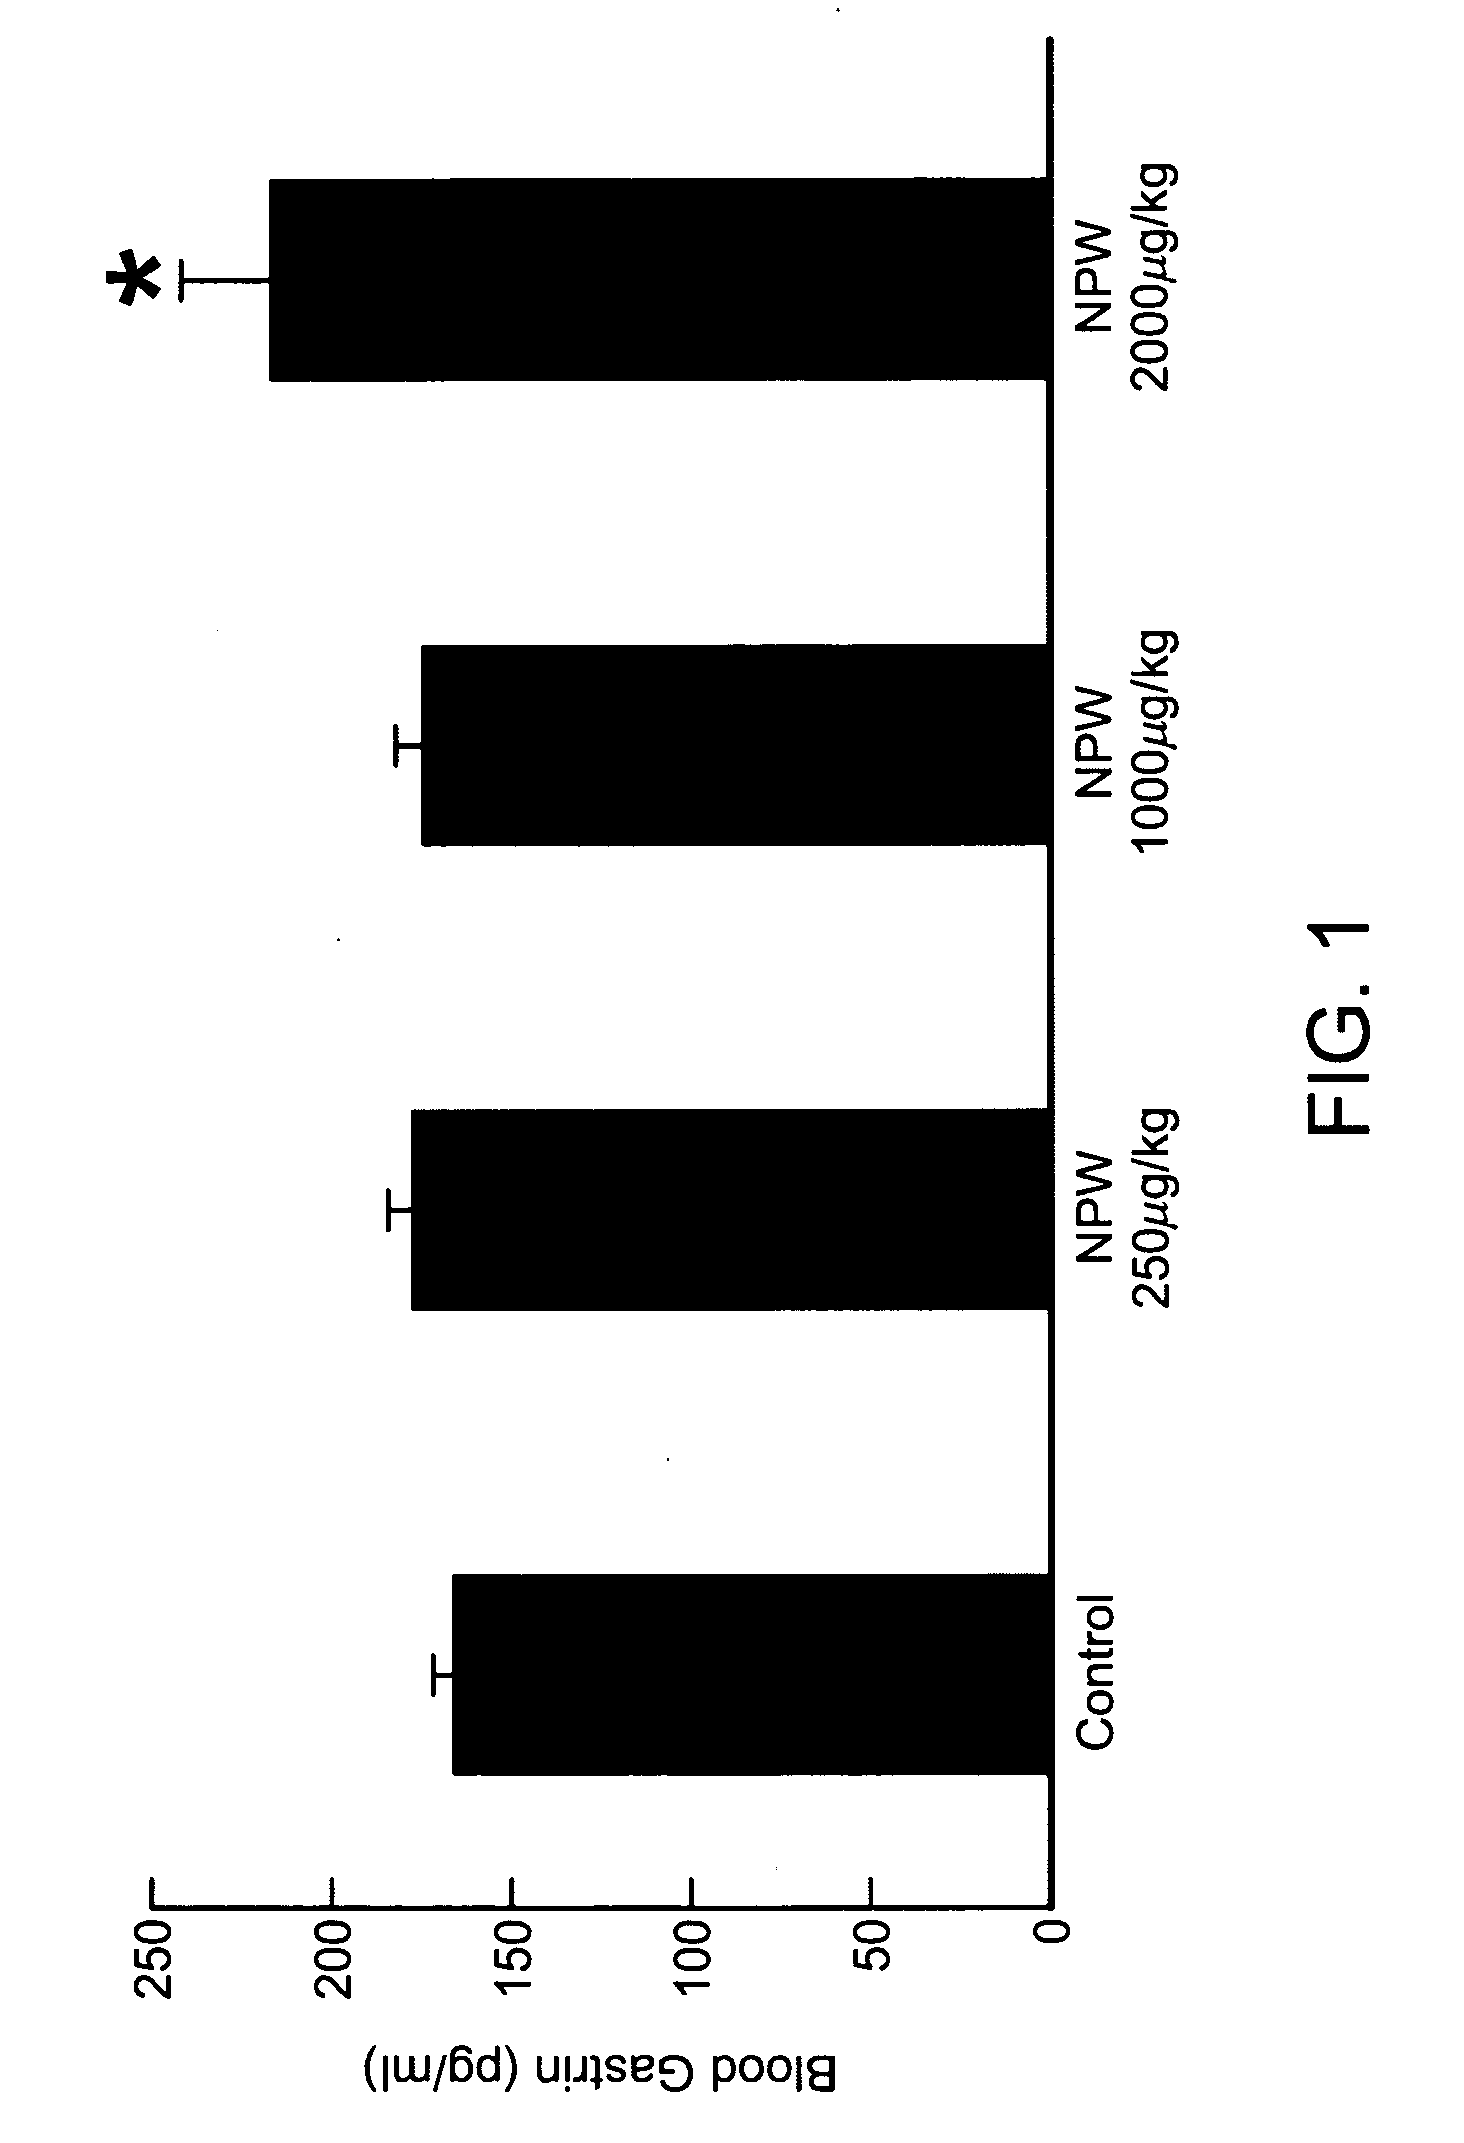 Agents for preventing and/or treating upper digestive tract disorders